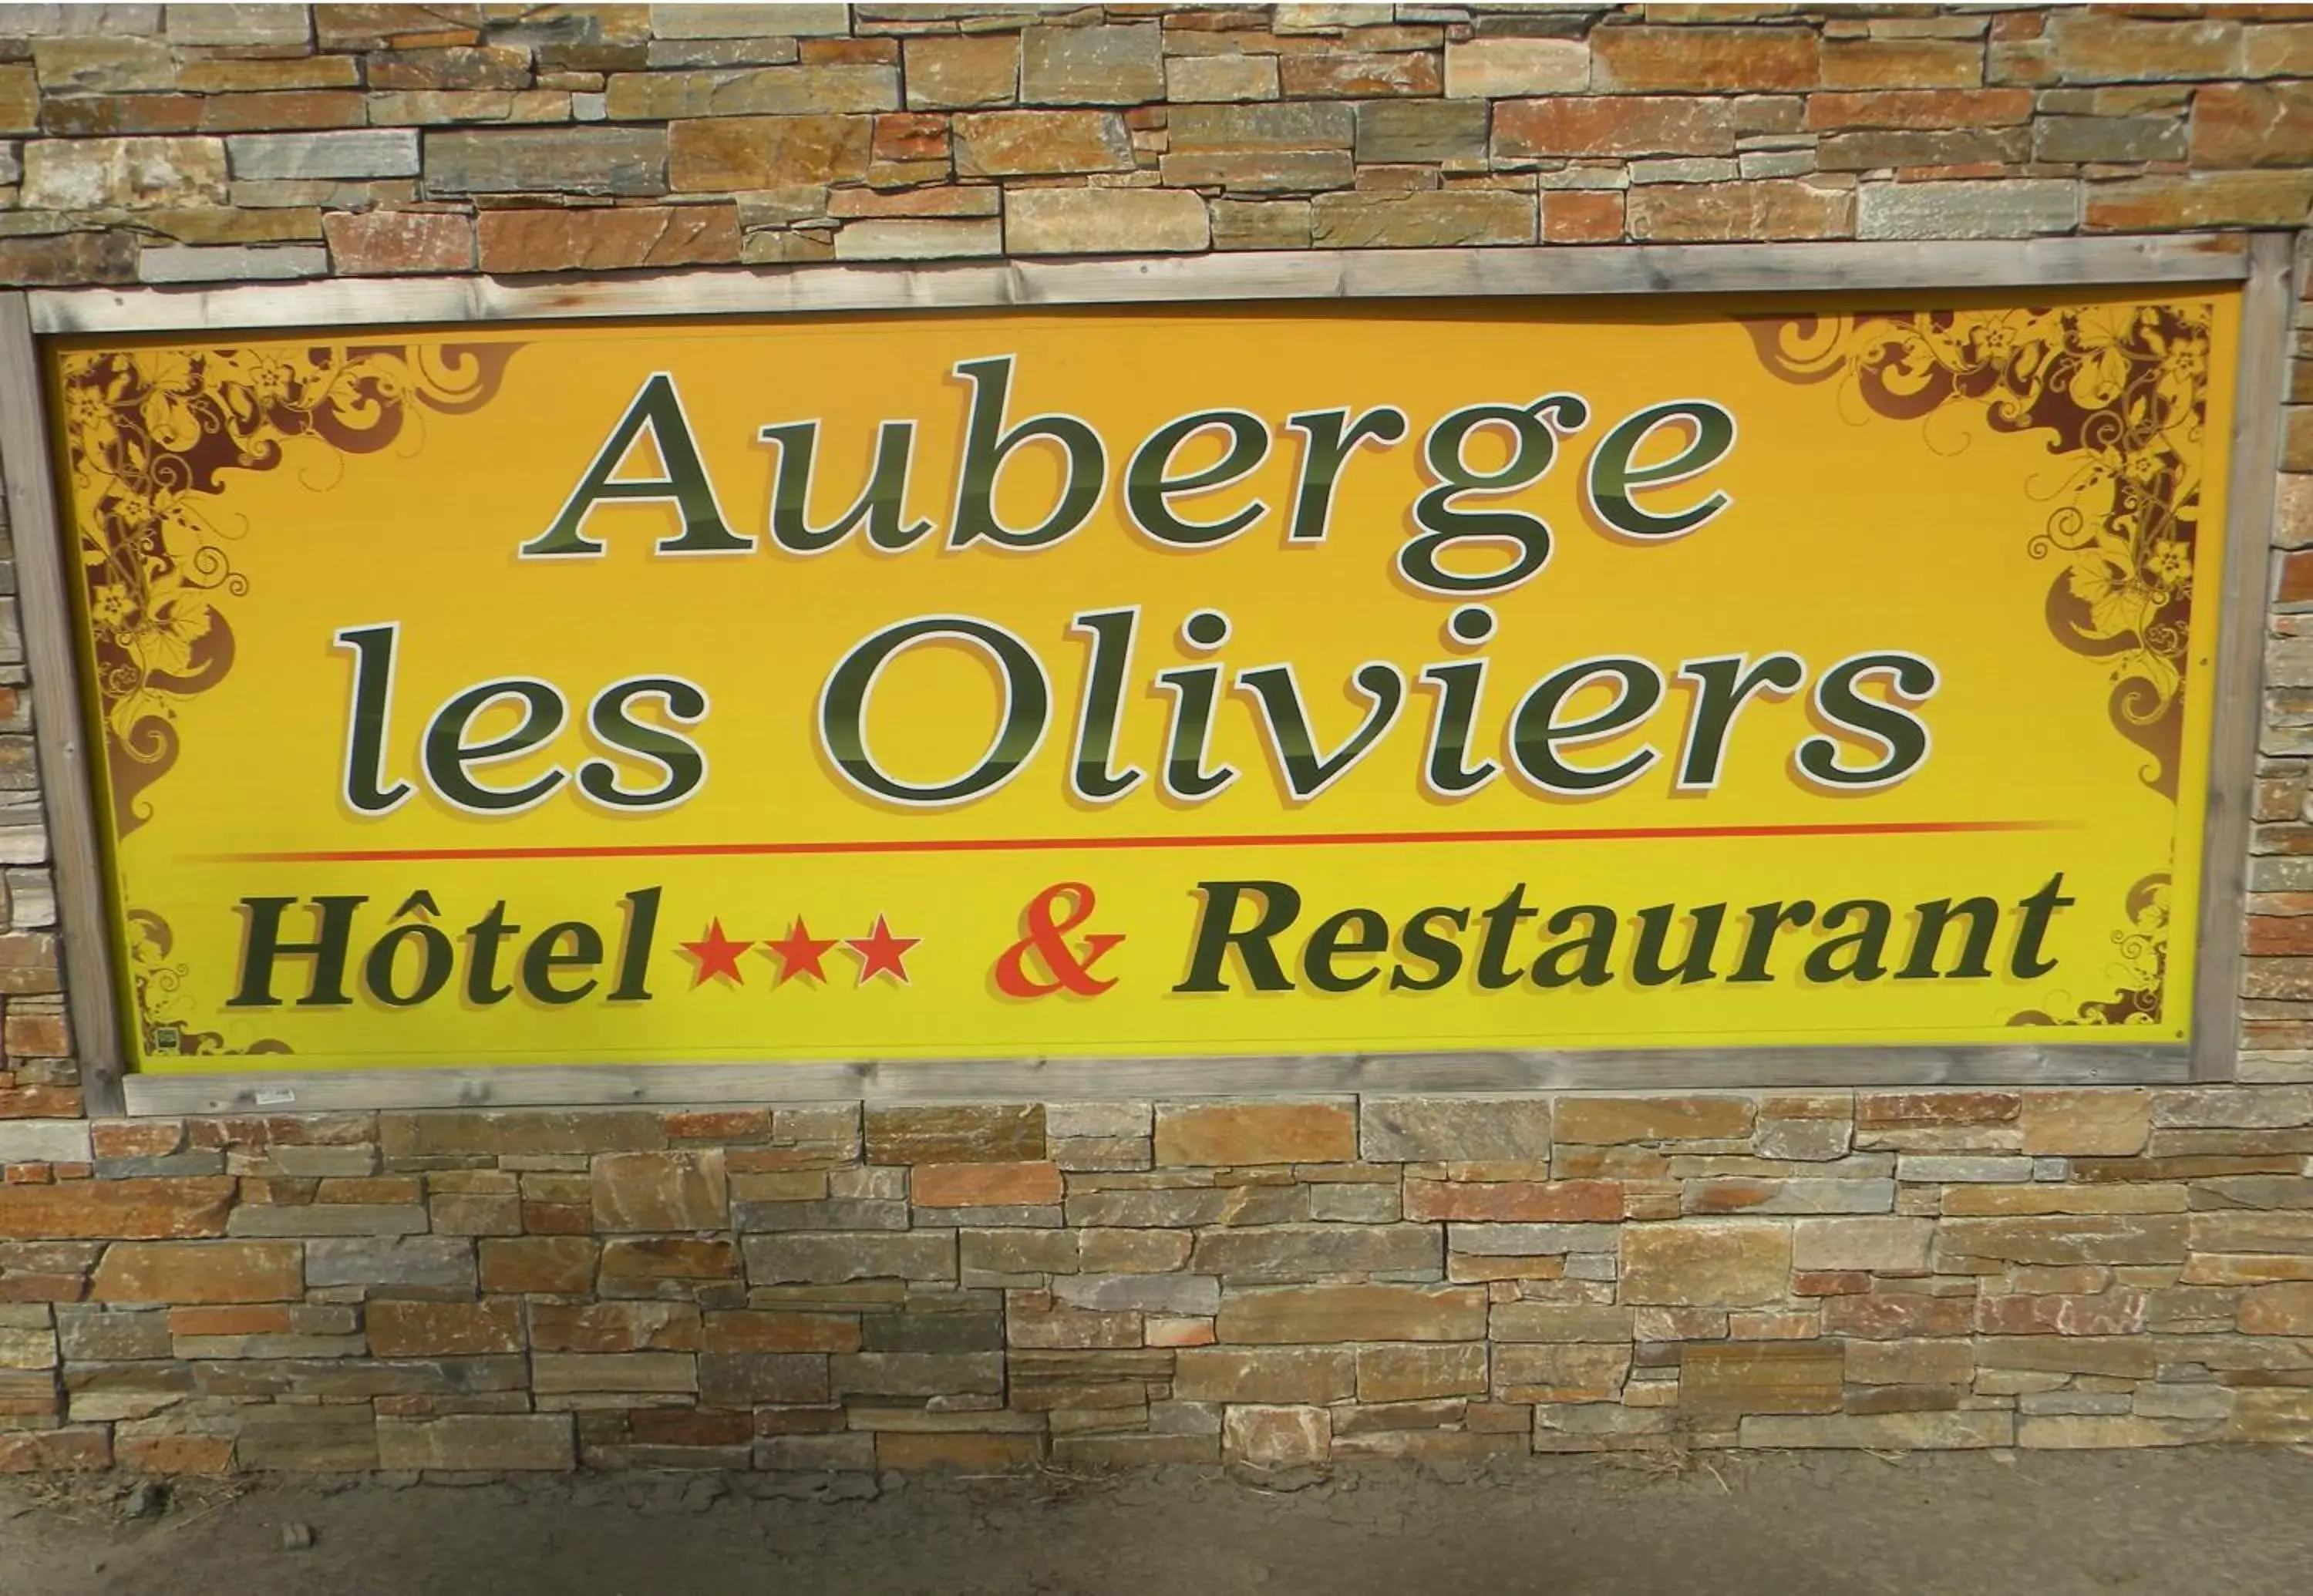 Property logo or sign in Auberge les Oliviers